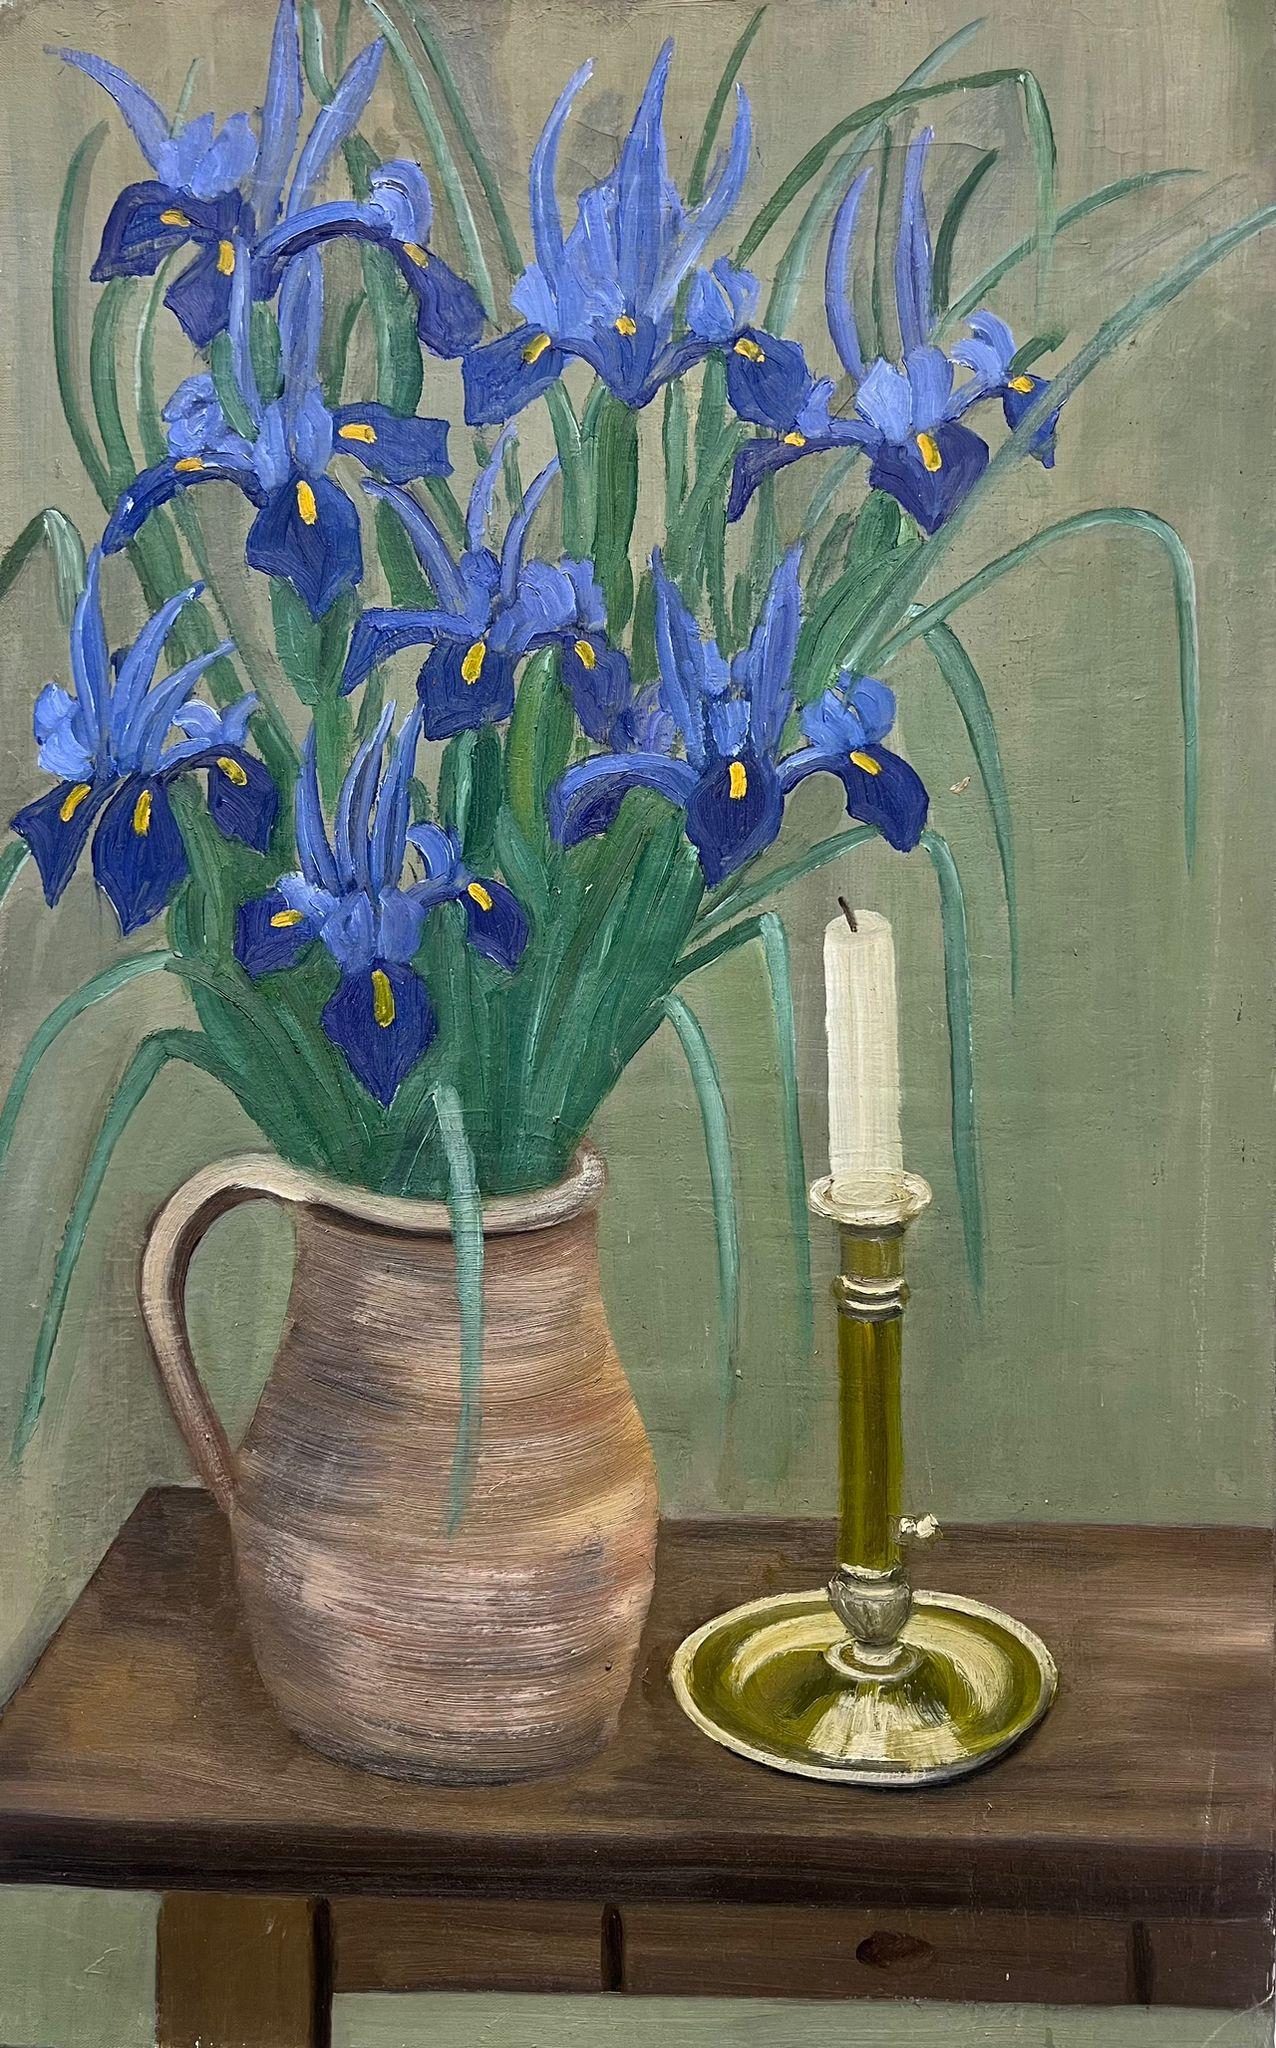 Mid 20th Century French Oil Painting Iris Flowers in Vase Still Life Interior